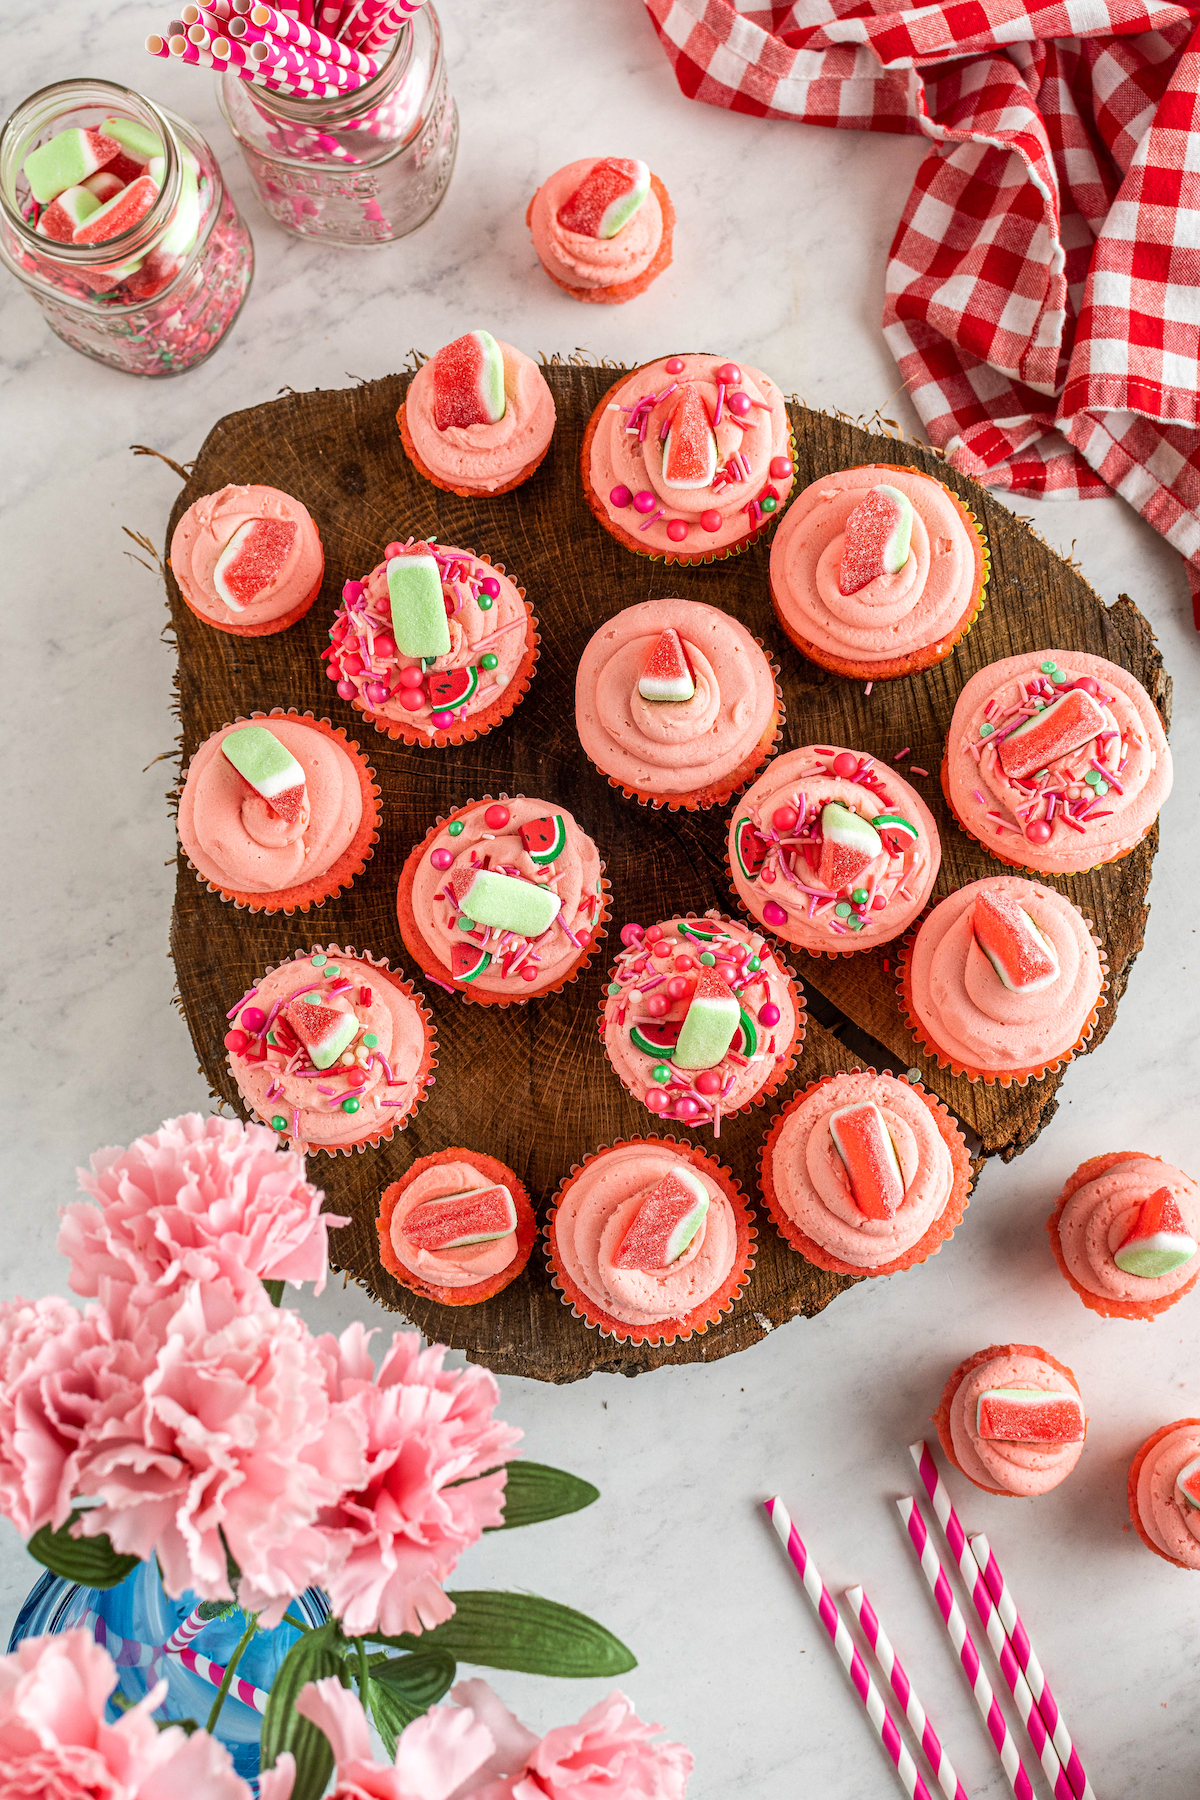 Top view of decorated watermelon cupcakes on a wooden platter, next to scattered cupcakes and pink flowers.